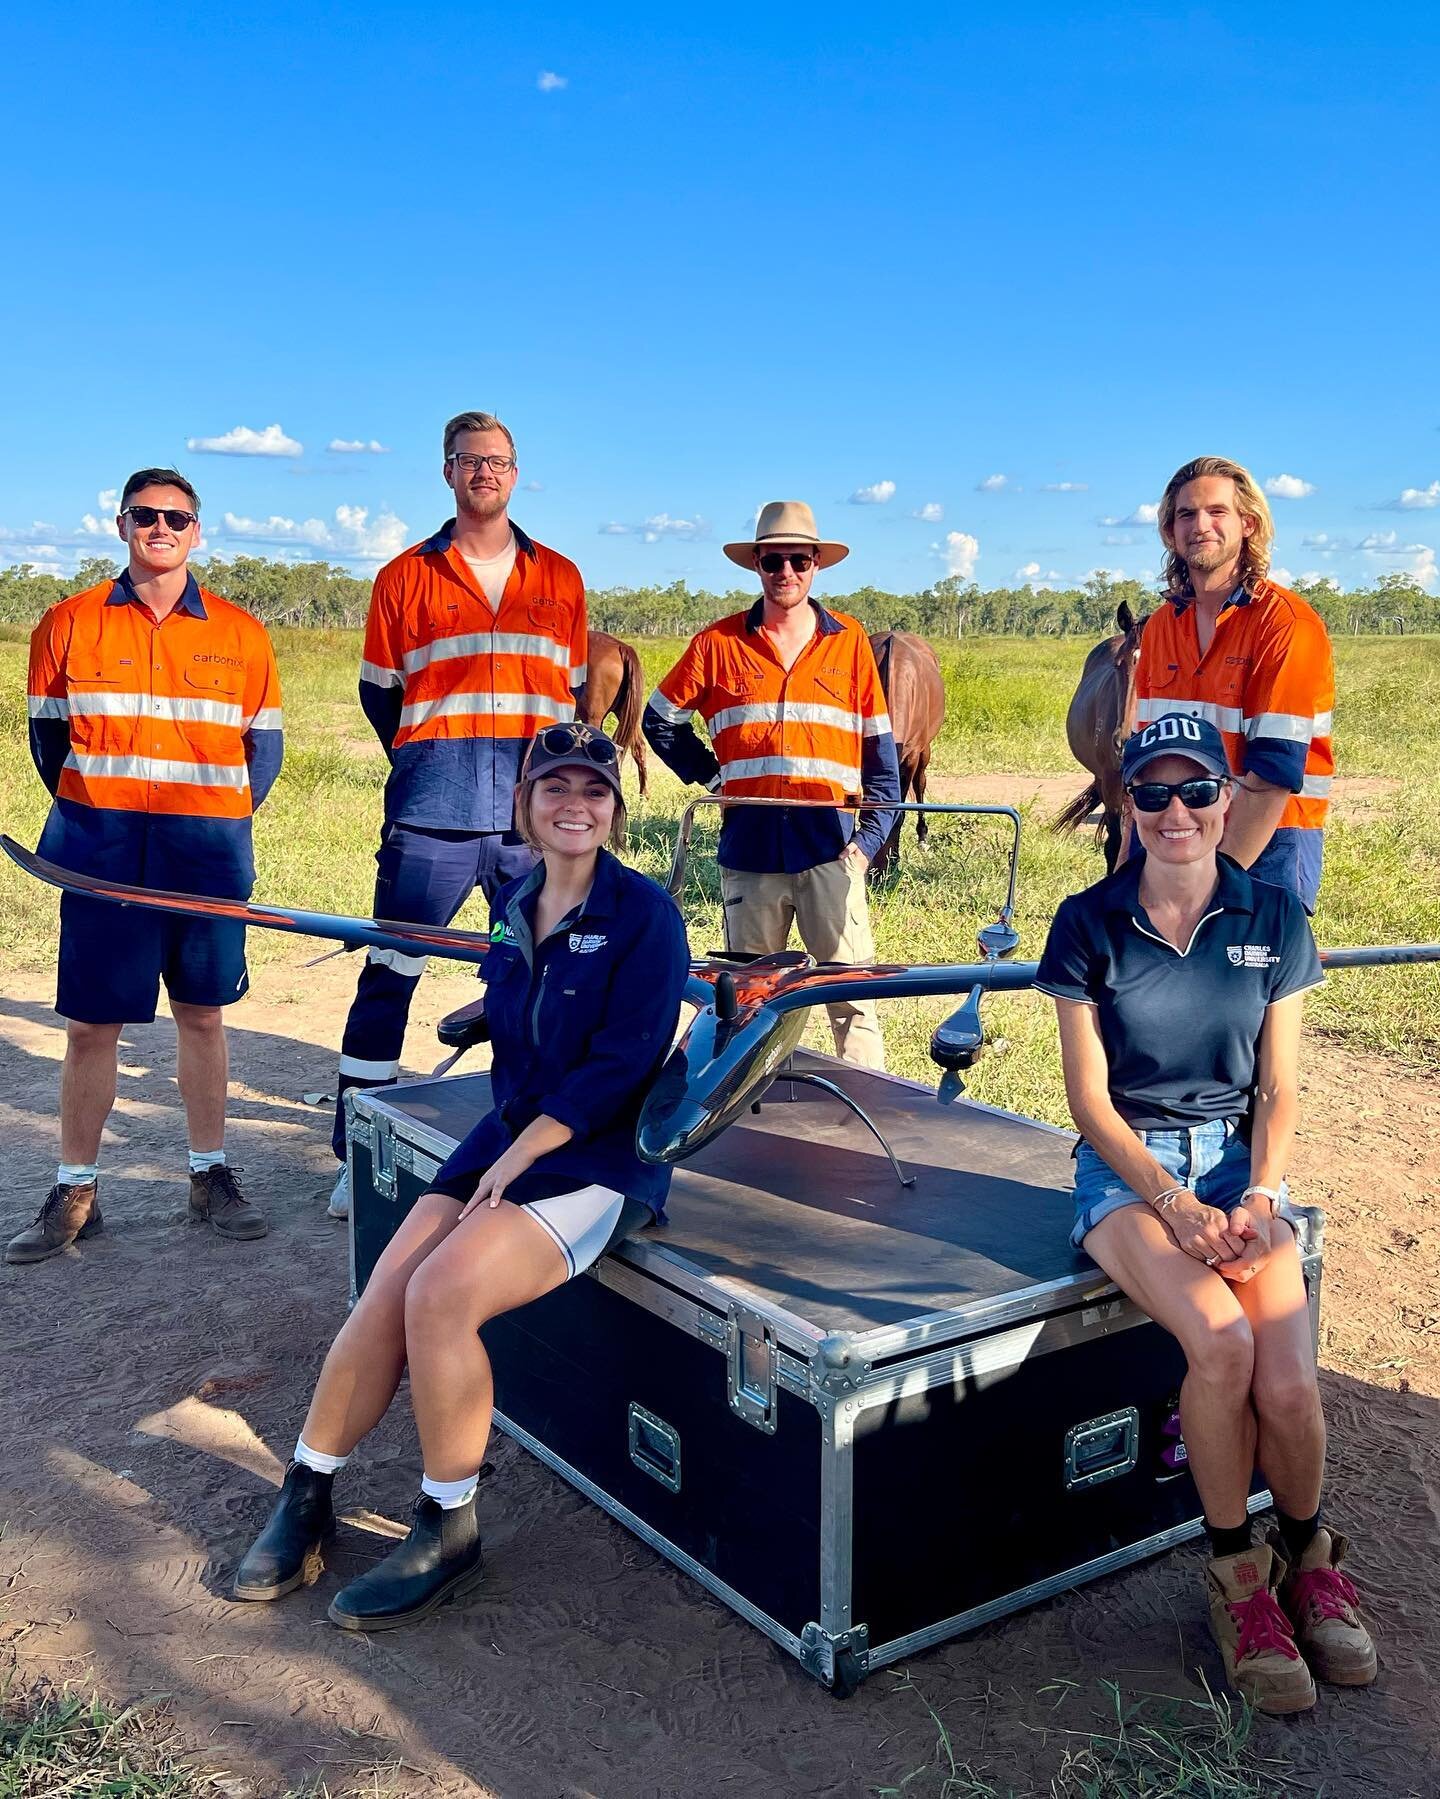 It was great hosting the @carbonix_uav team in Katherine last week where they did several flights over CDU infrastructure with their Volanti aircraft. 

We are looking forward to having the team back up here again soon!